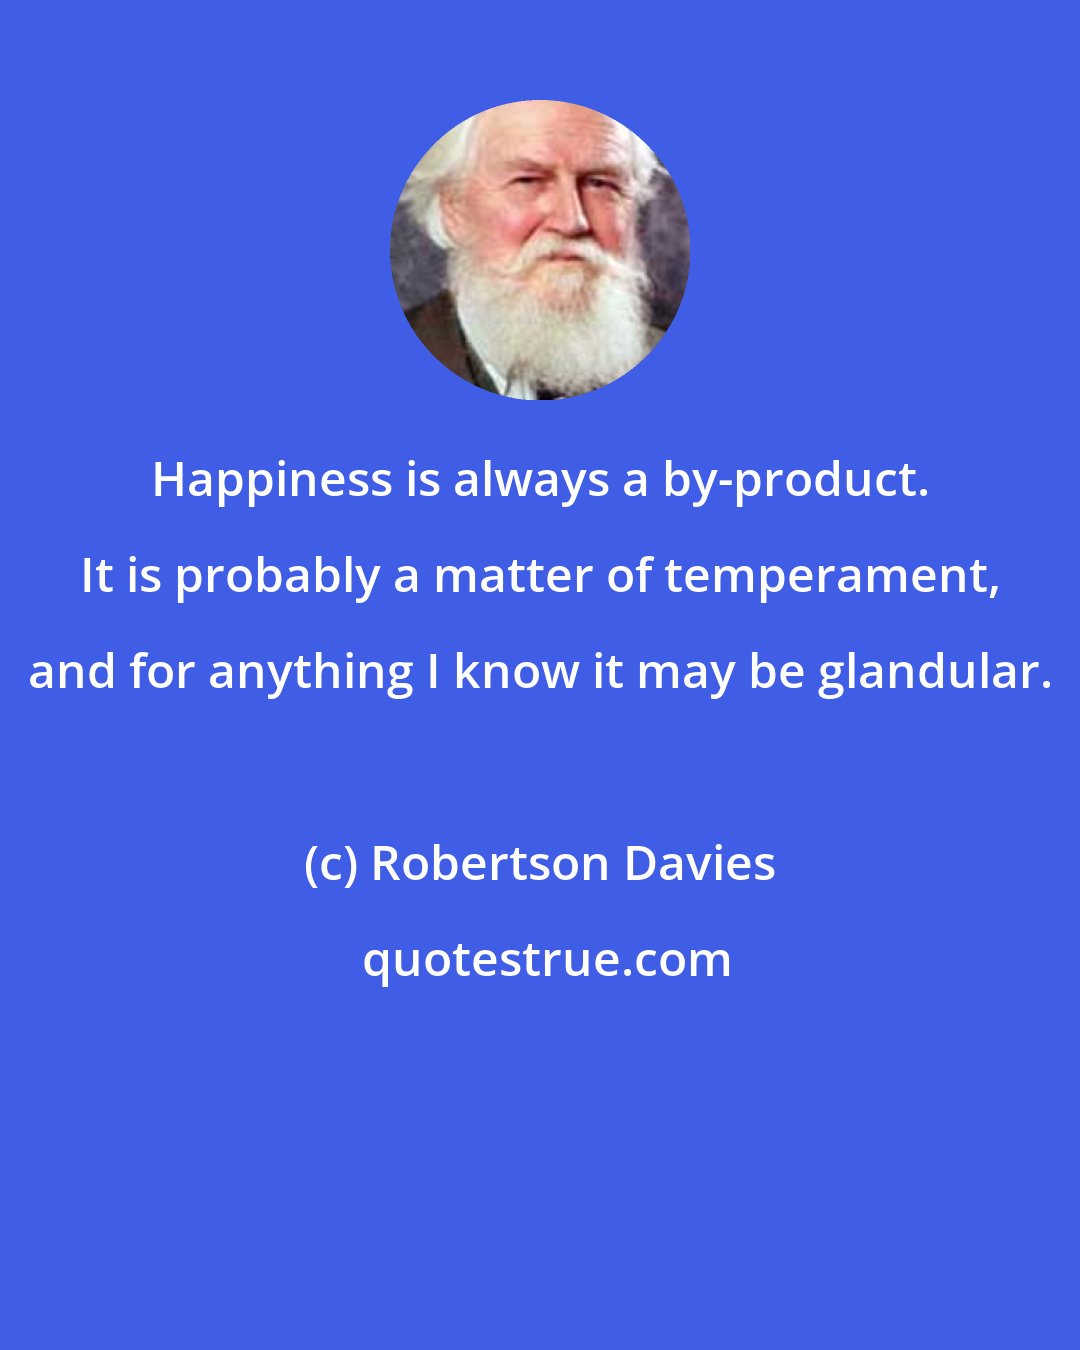 Robertson Davies: Happiness is always a by-product. It is probably a matter of temperament, and for anything I know it may be glandular.